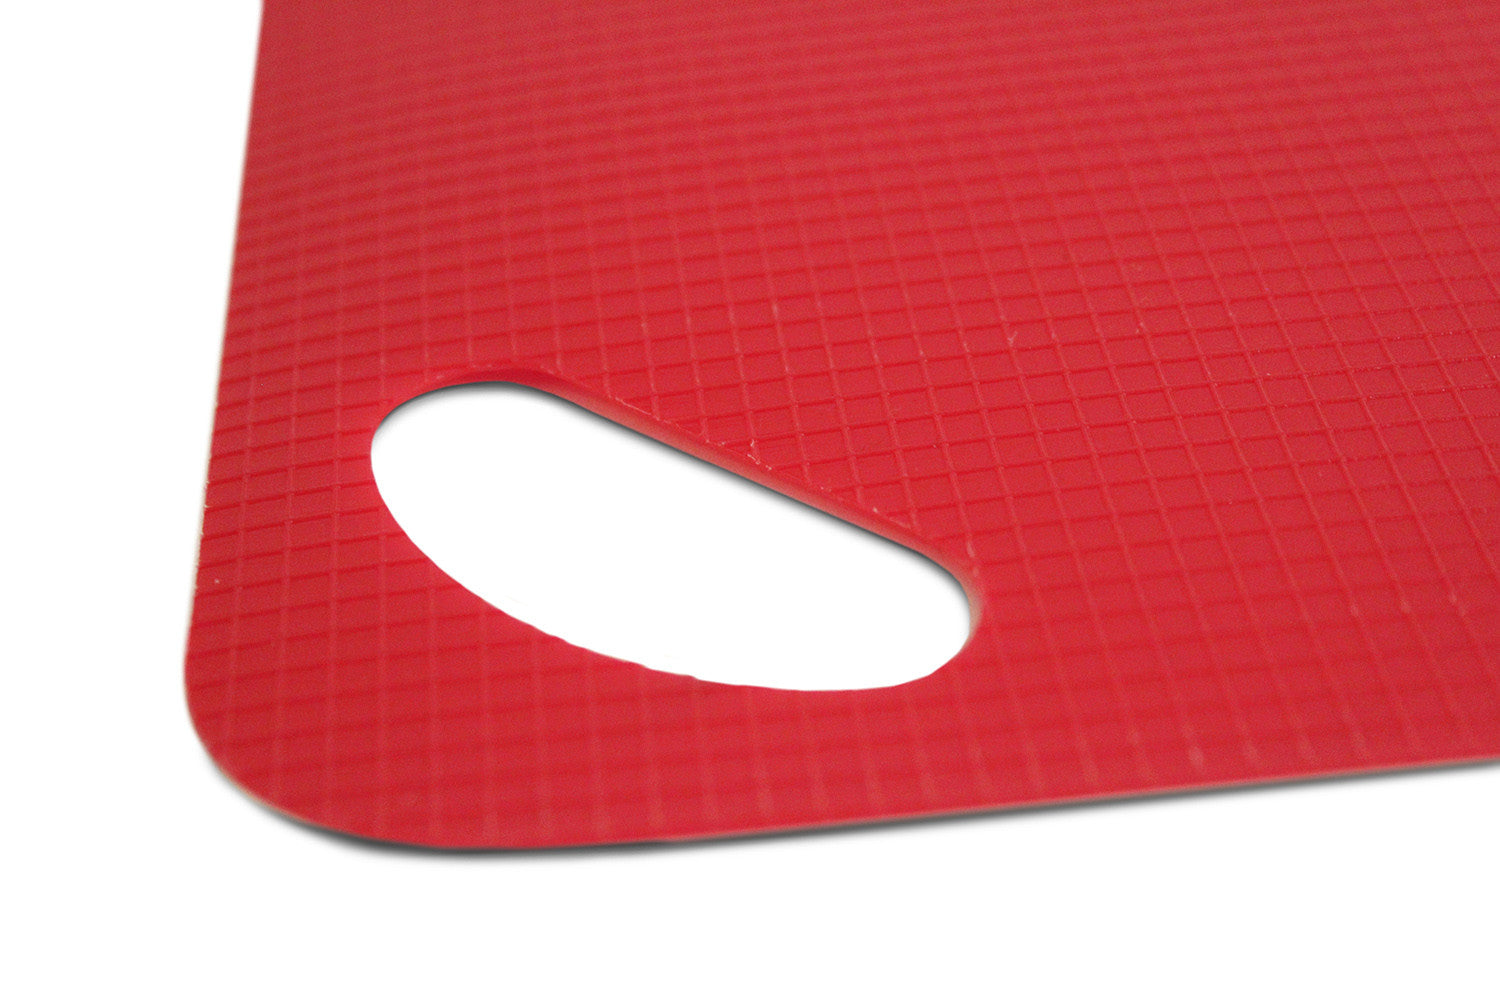 Flexible Cutting Mats 4 Piece with Non-Slip Grip in Multicolor - Cutting Board